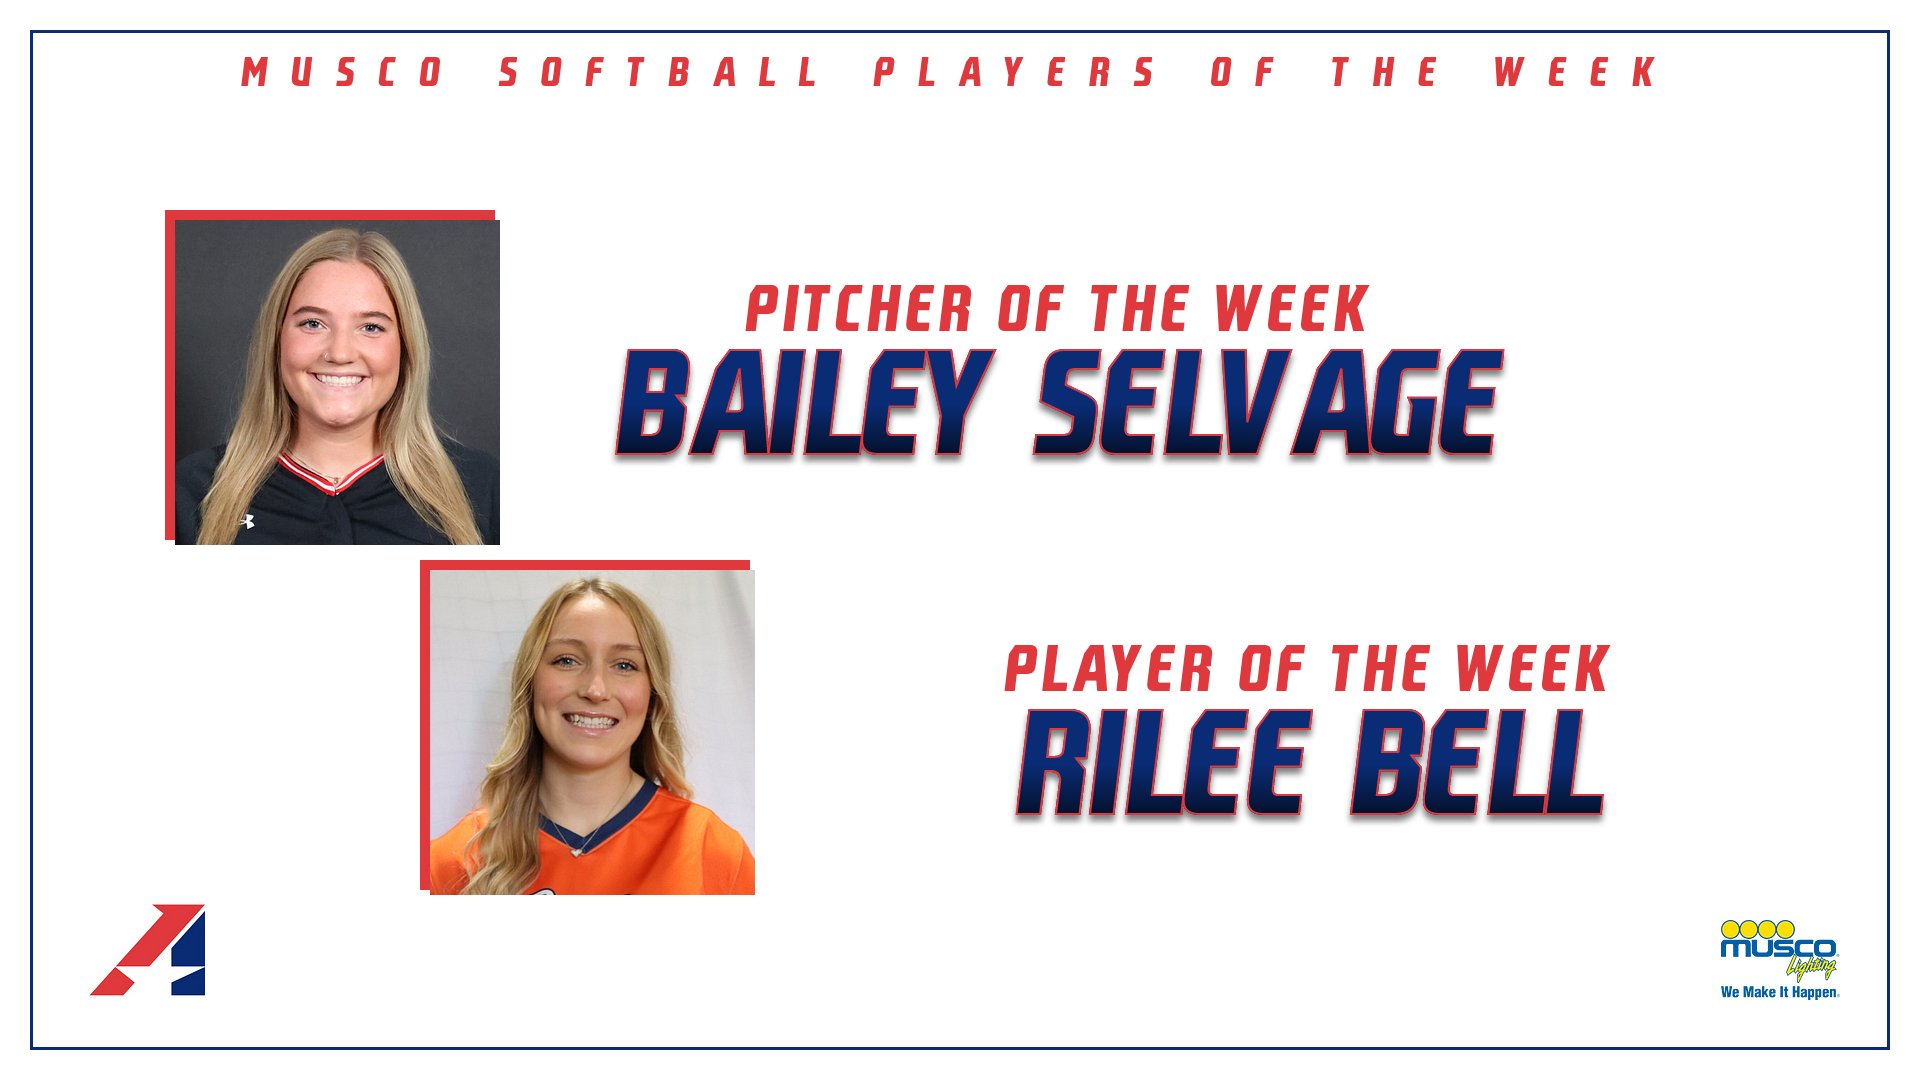 Bell, Selvage Earn Musco Softball Player and Pitcher of the Week Awards